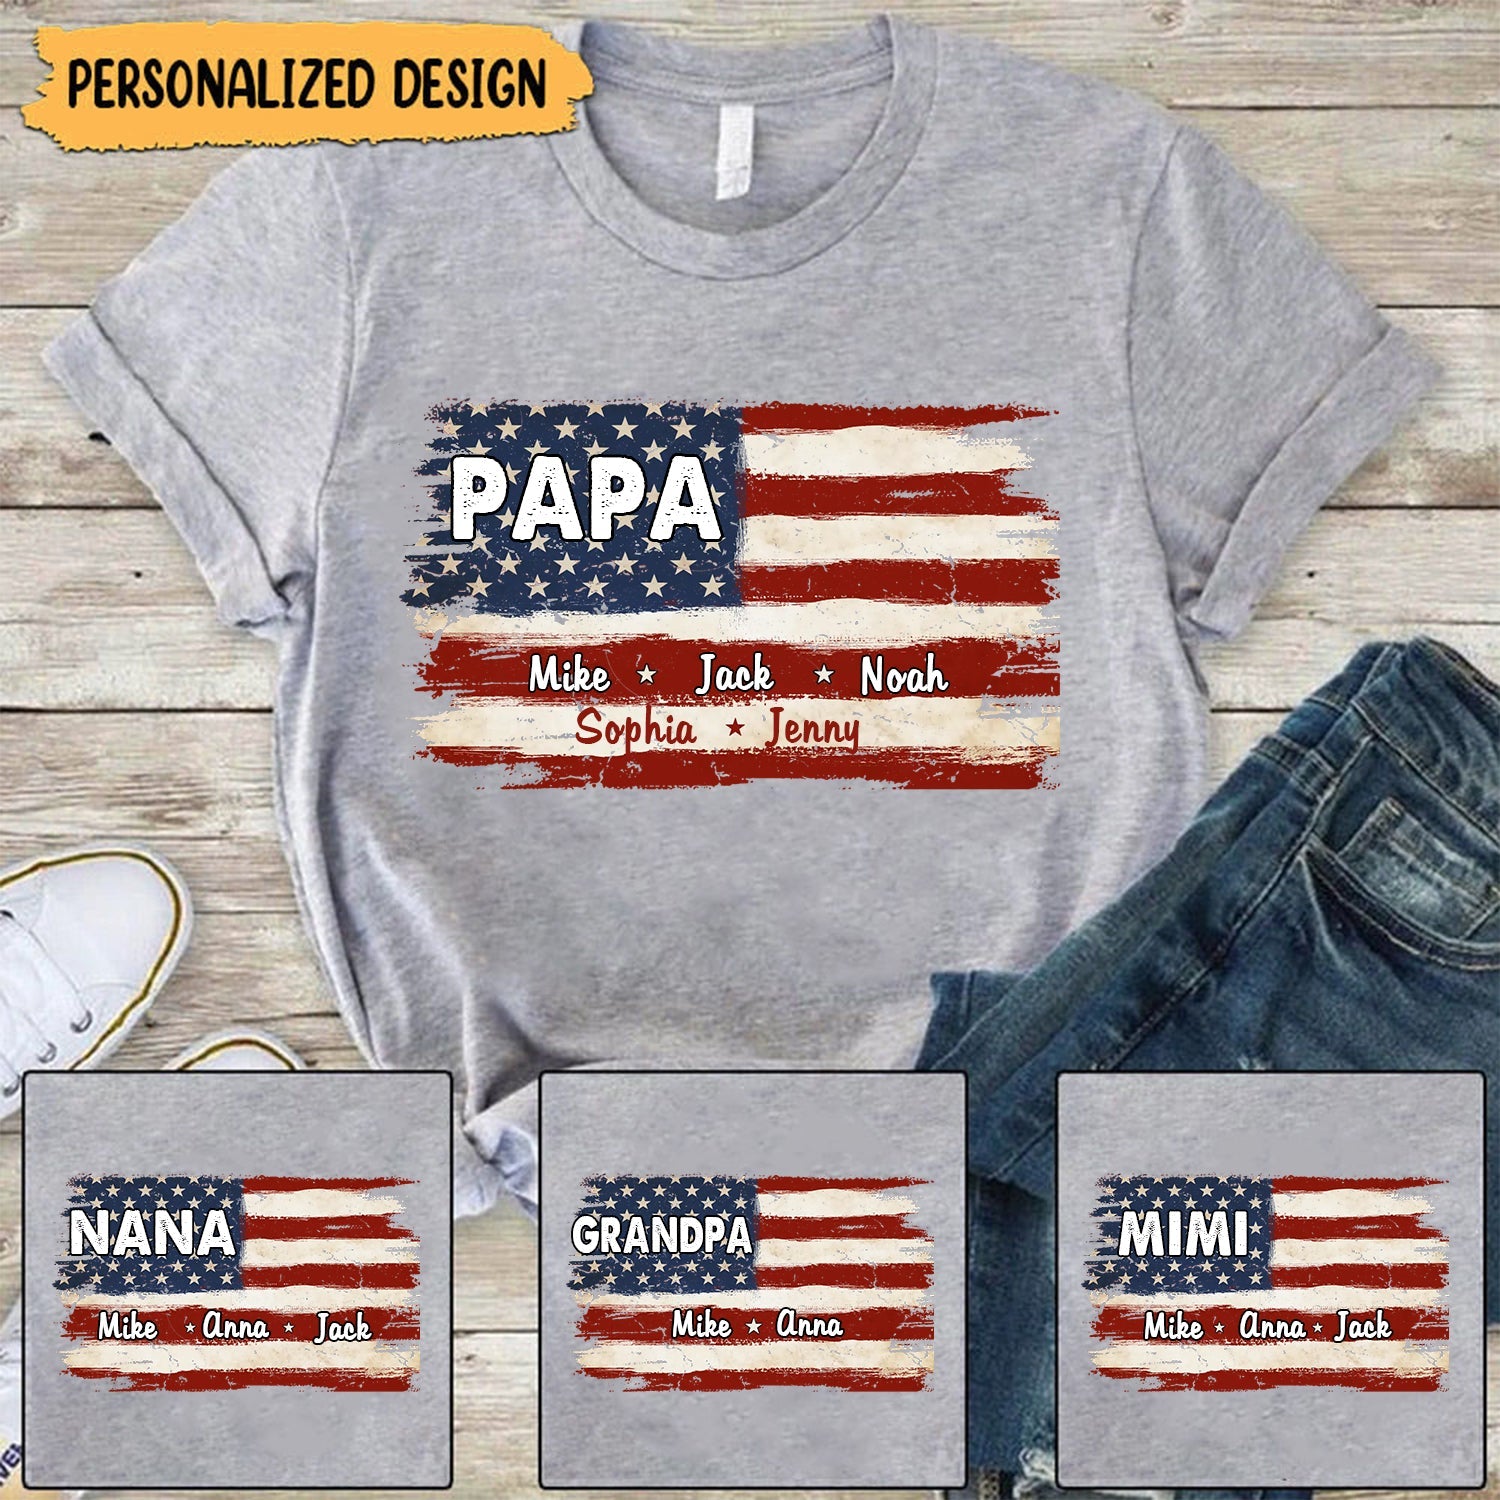 Proud To Be American - Personalized Unisex T-shirt, Gift For Grandma, Mom, Dad, Grandpa